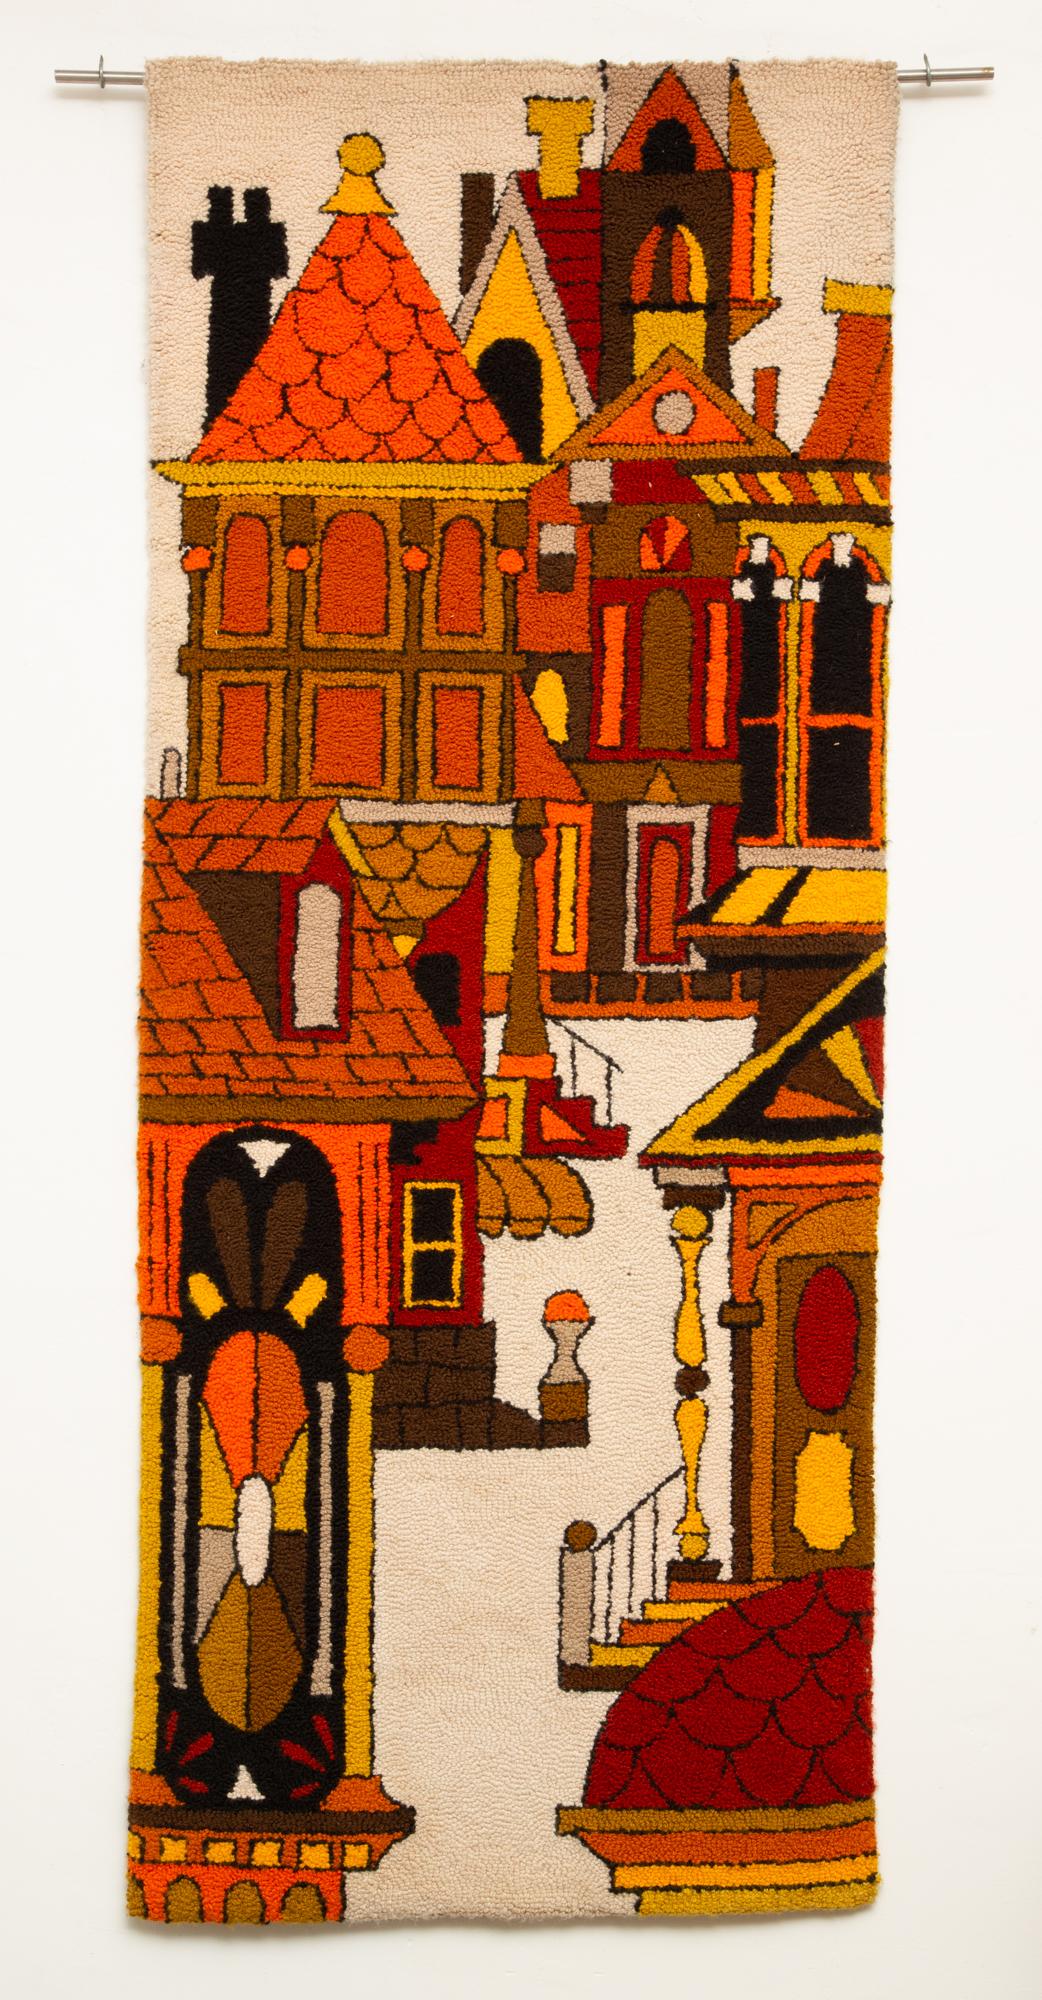 Large-scale architectural carpet weave tapestry, circa 1970s. A vivid and lively warm-toned wall hanging with cityscape and Victorian architecture imagery featuring forms and perspectives that are reminiscent of a more simplistic take on cubism. The